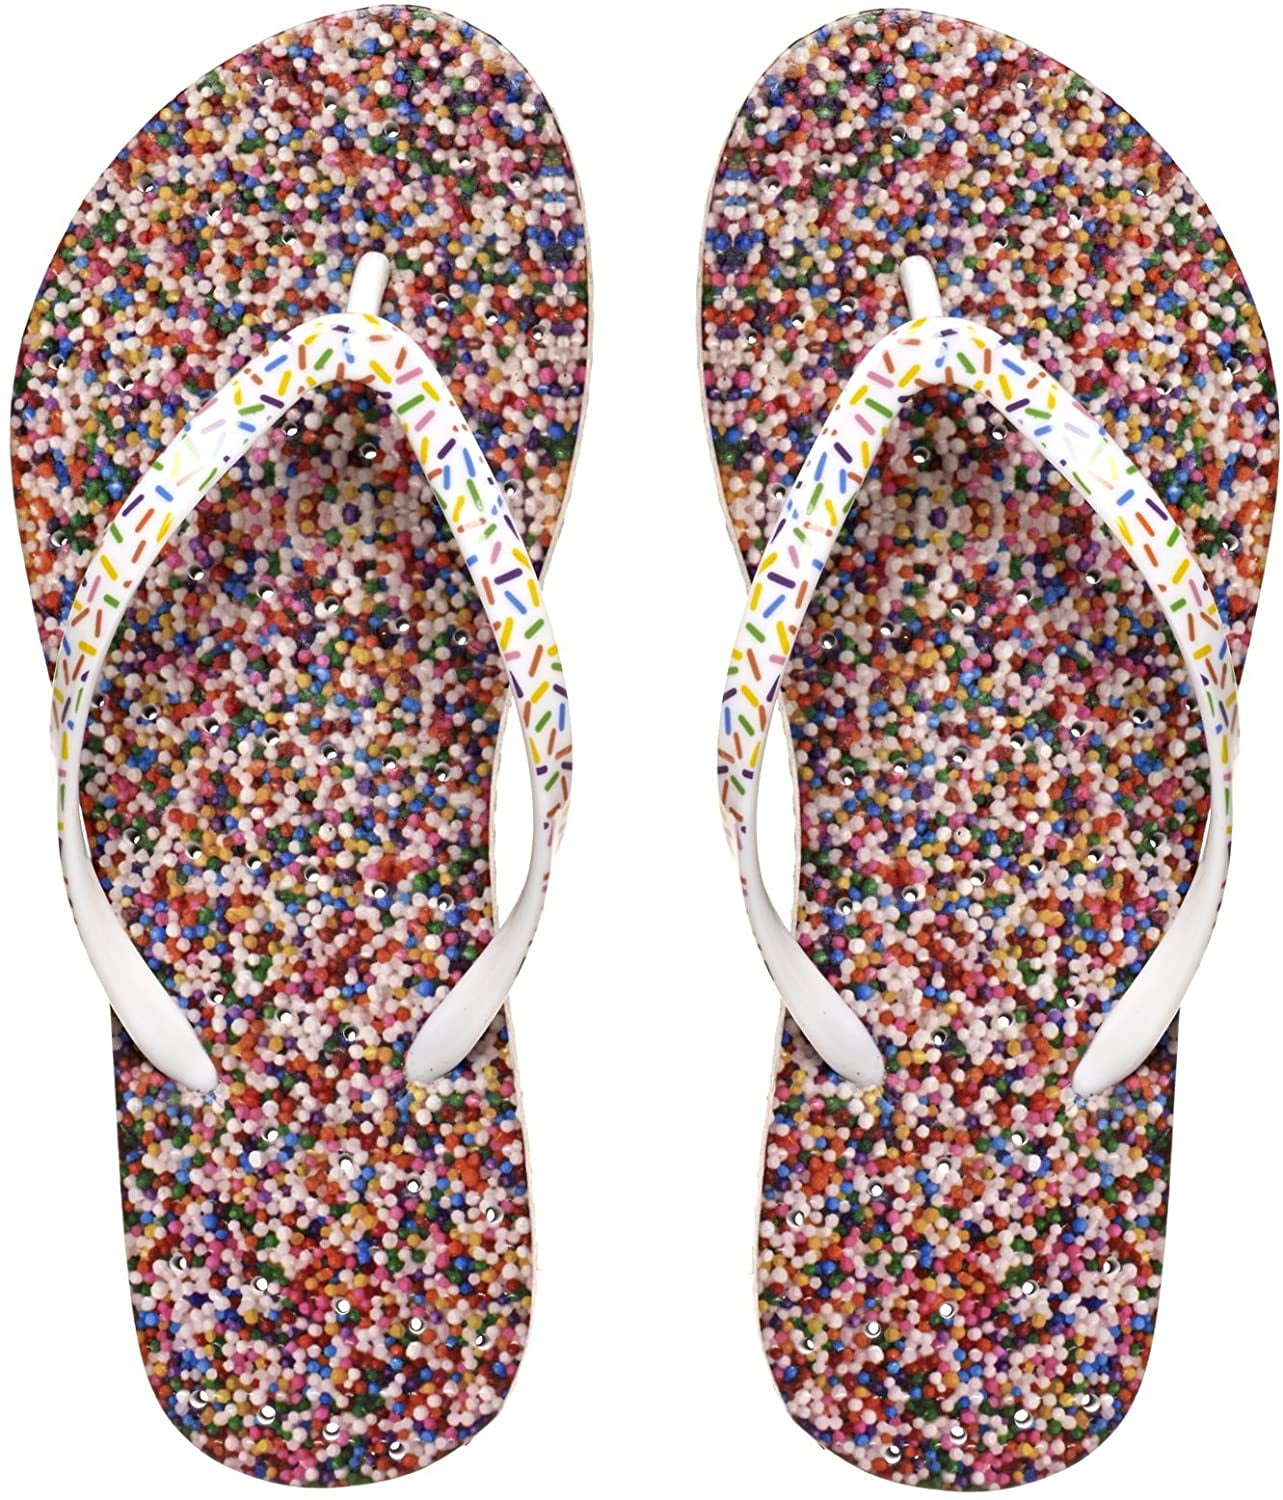 Camp and Gym Beach Elegance Collection Showaflops Girls Antimicrobial Shower & Water Sandals for Pool 